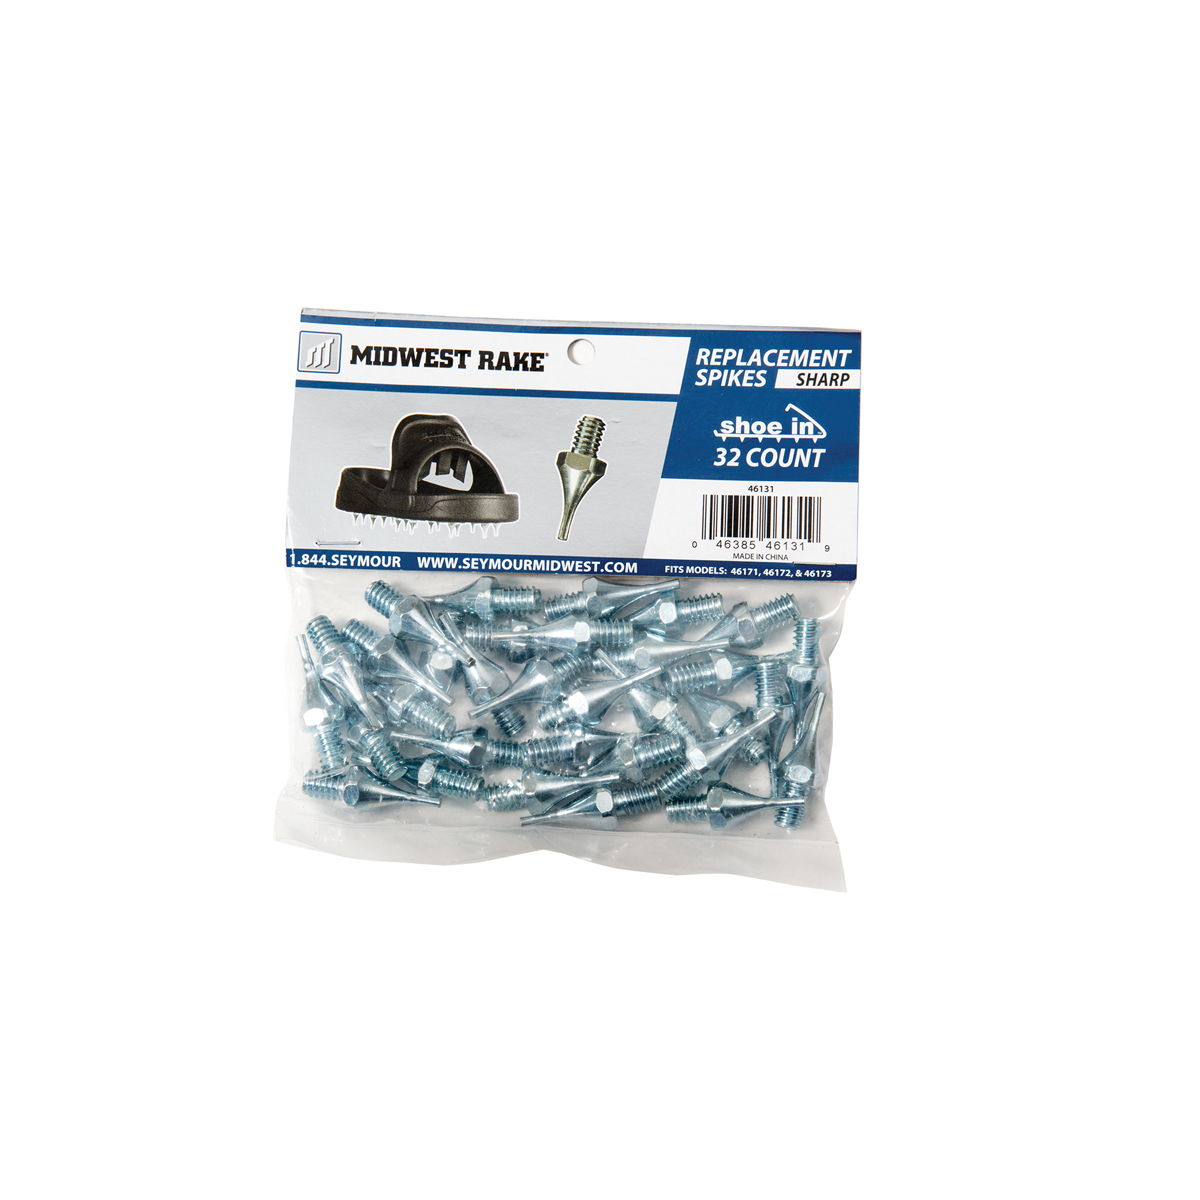 Seymour Midwest Replacement Spikes for Spike Shoes, 3/4" Sharp Spikes, 32 Count